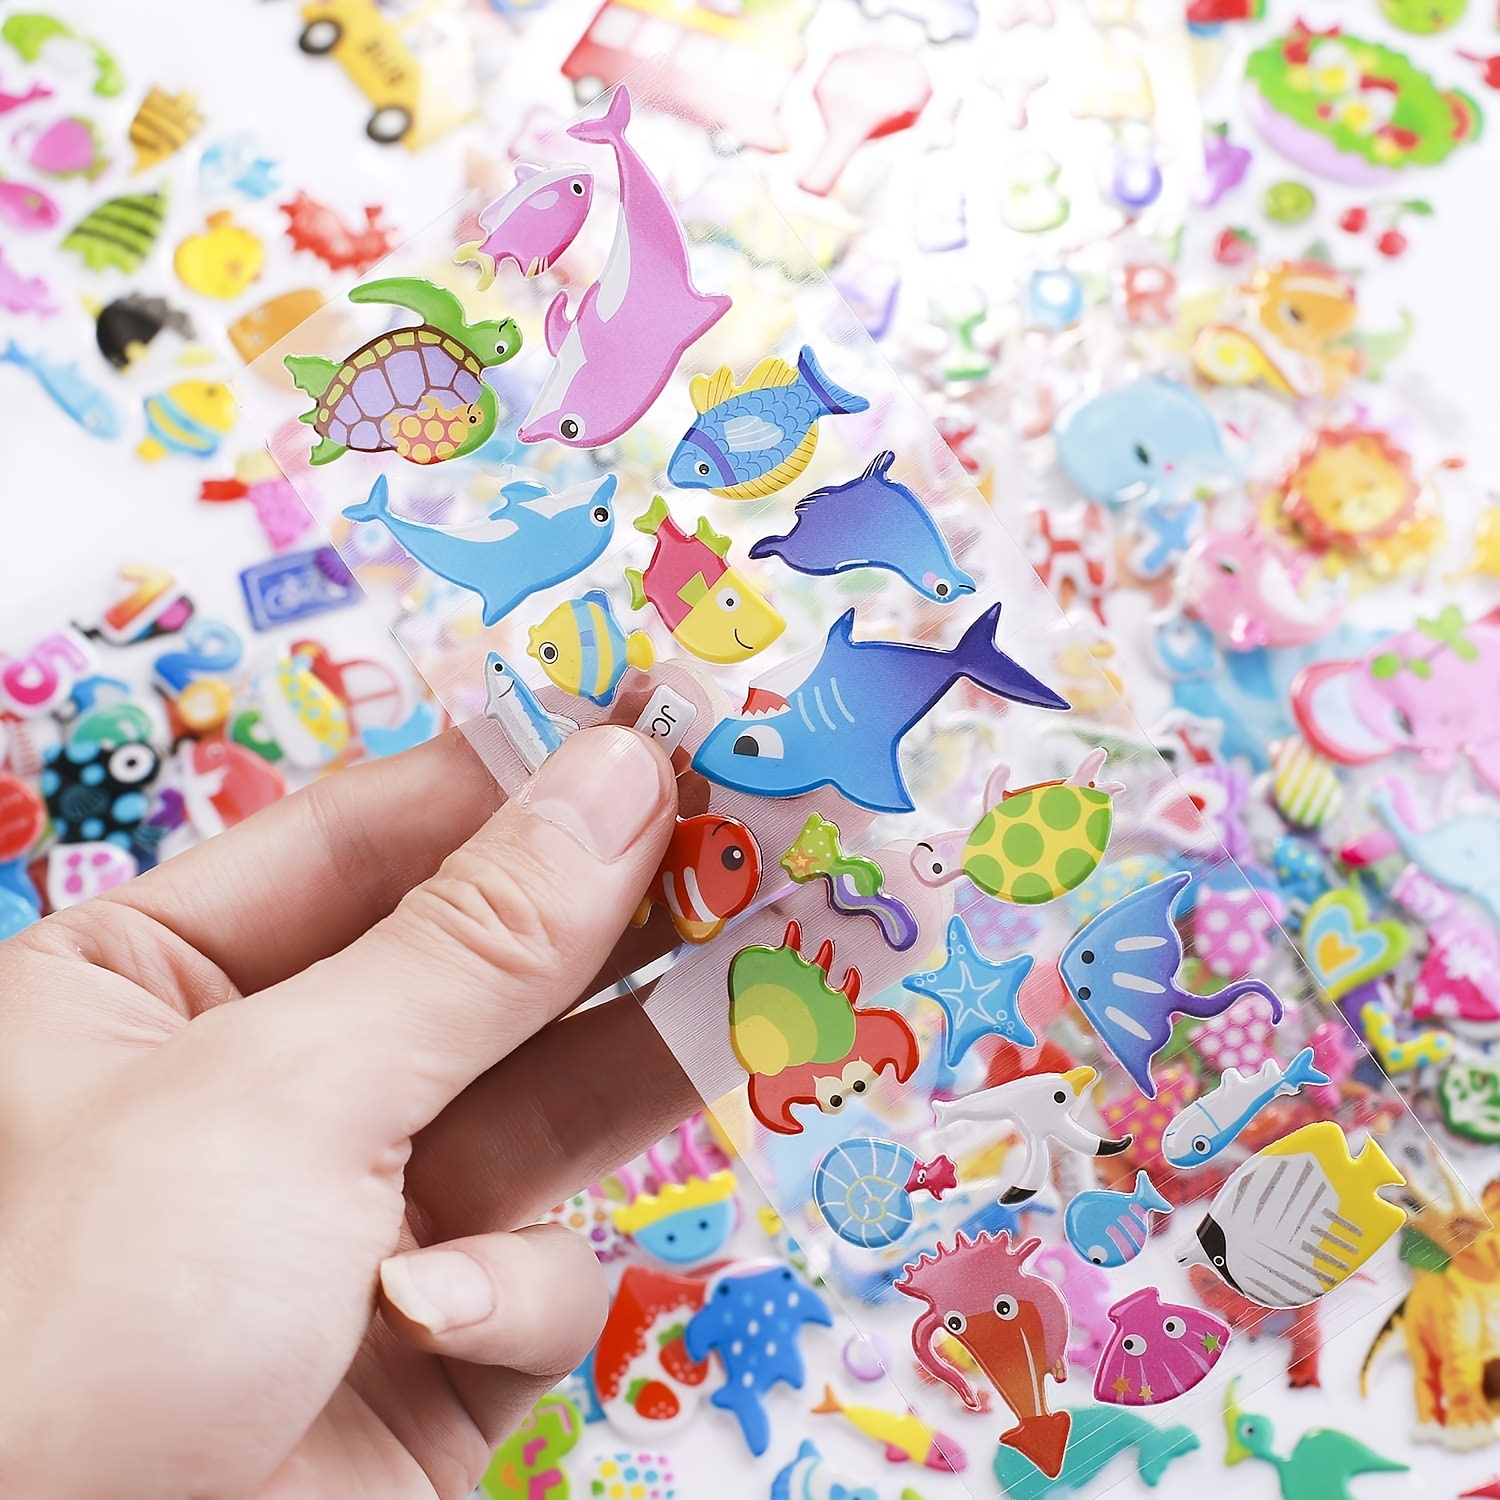 3D Stickers for Kids Toddlers 450+ Vivid Puffy Kids Stickers 20